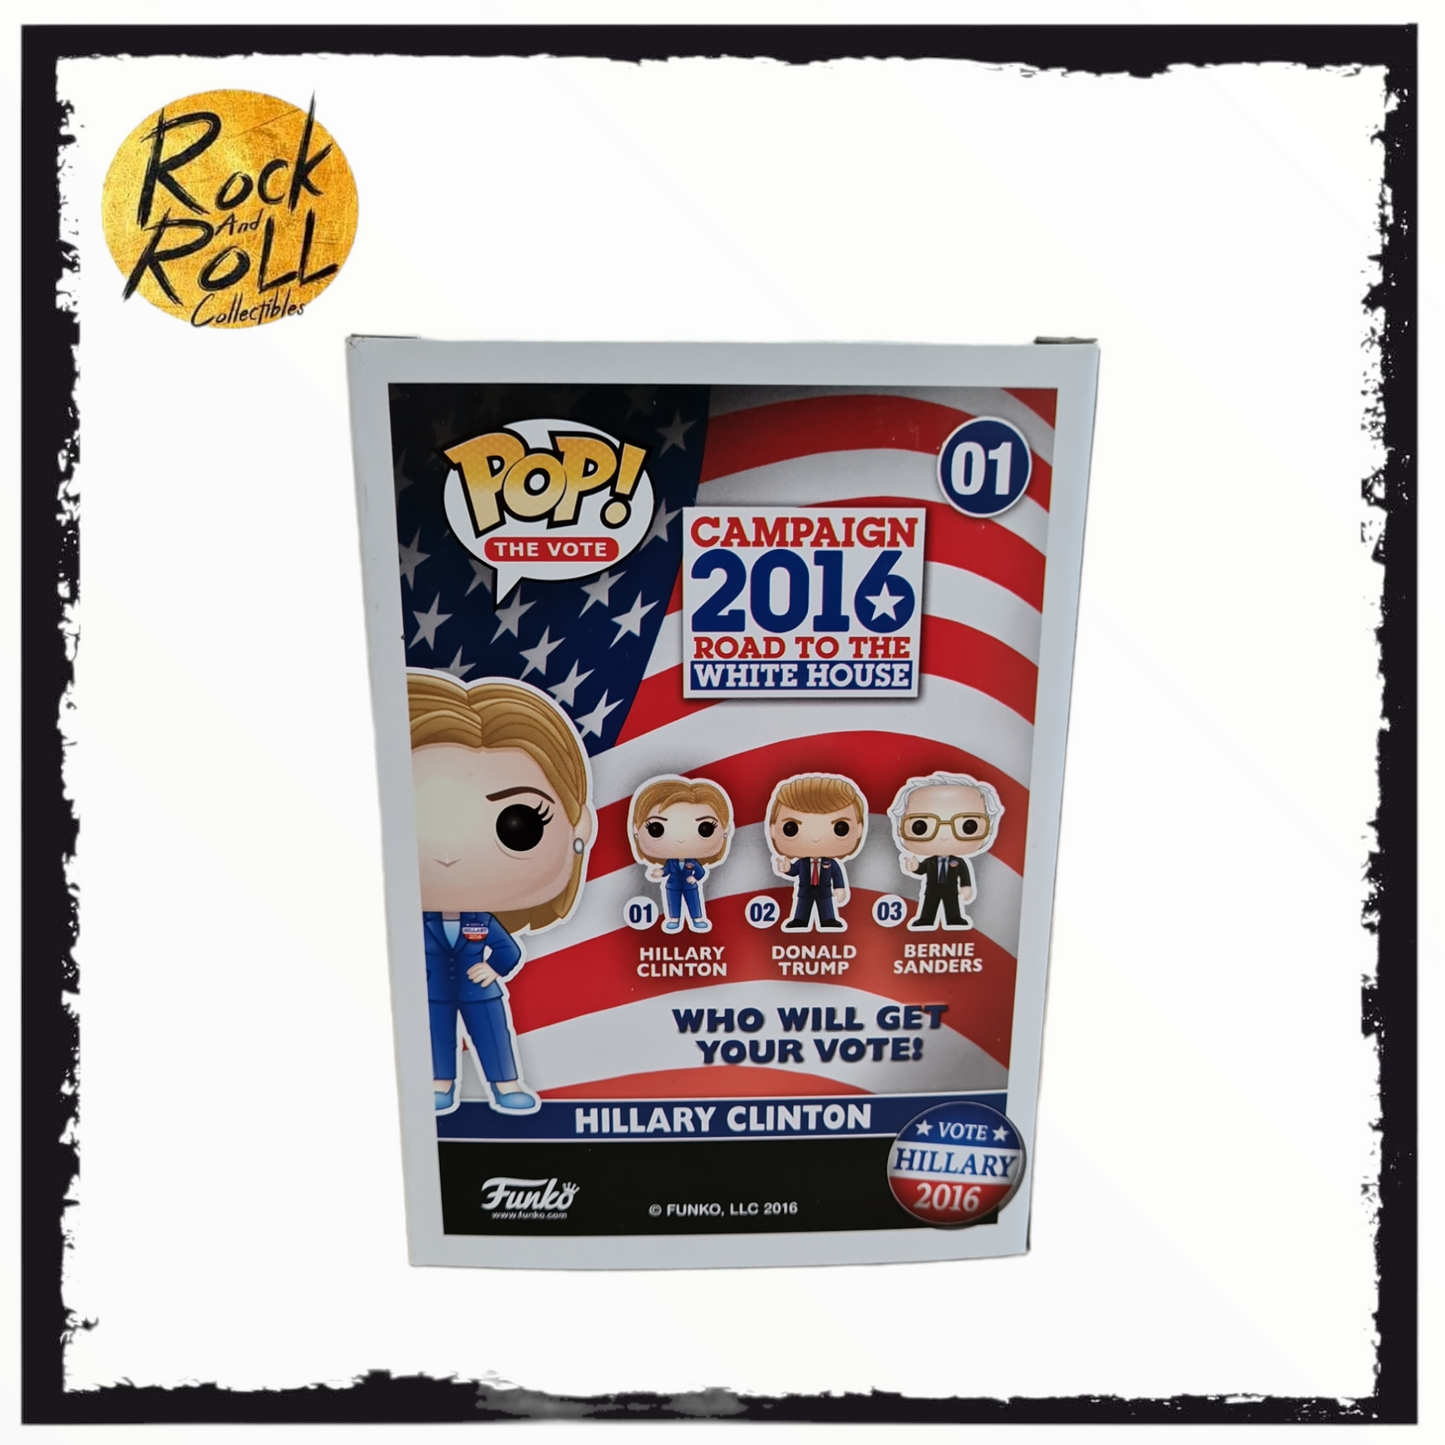 Campaign 2016 Road To The White House - Hillary Clinton Funko Pop! Vinyl #01